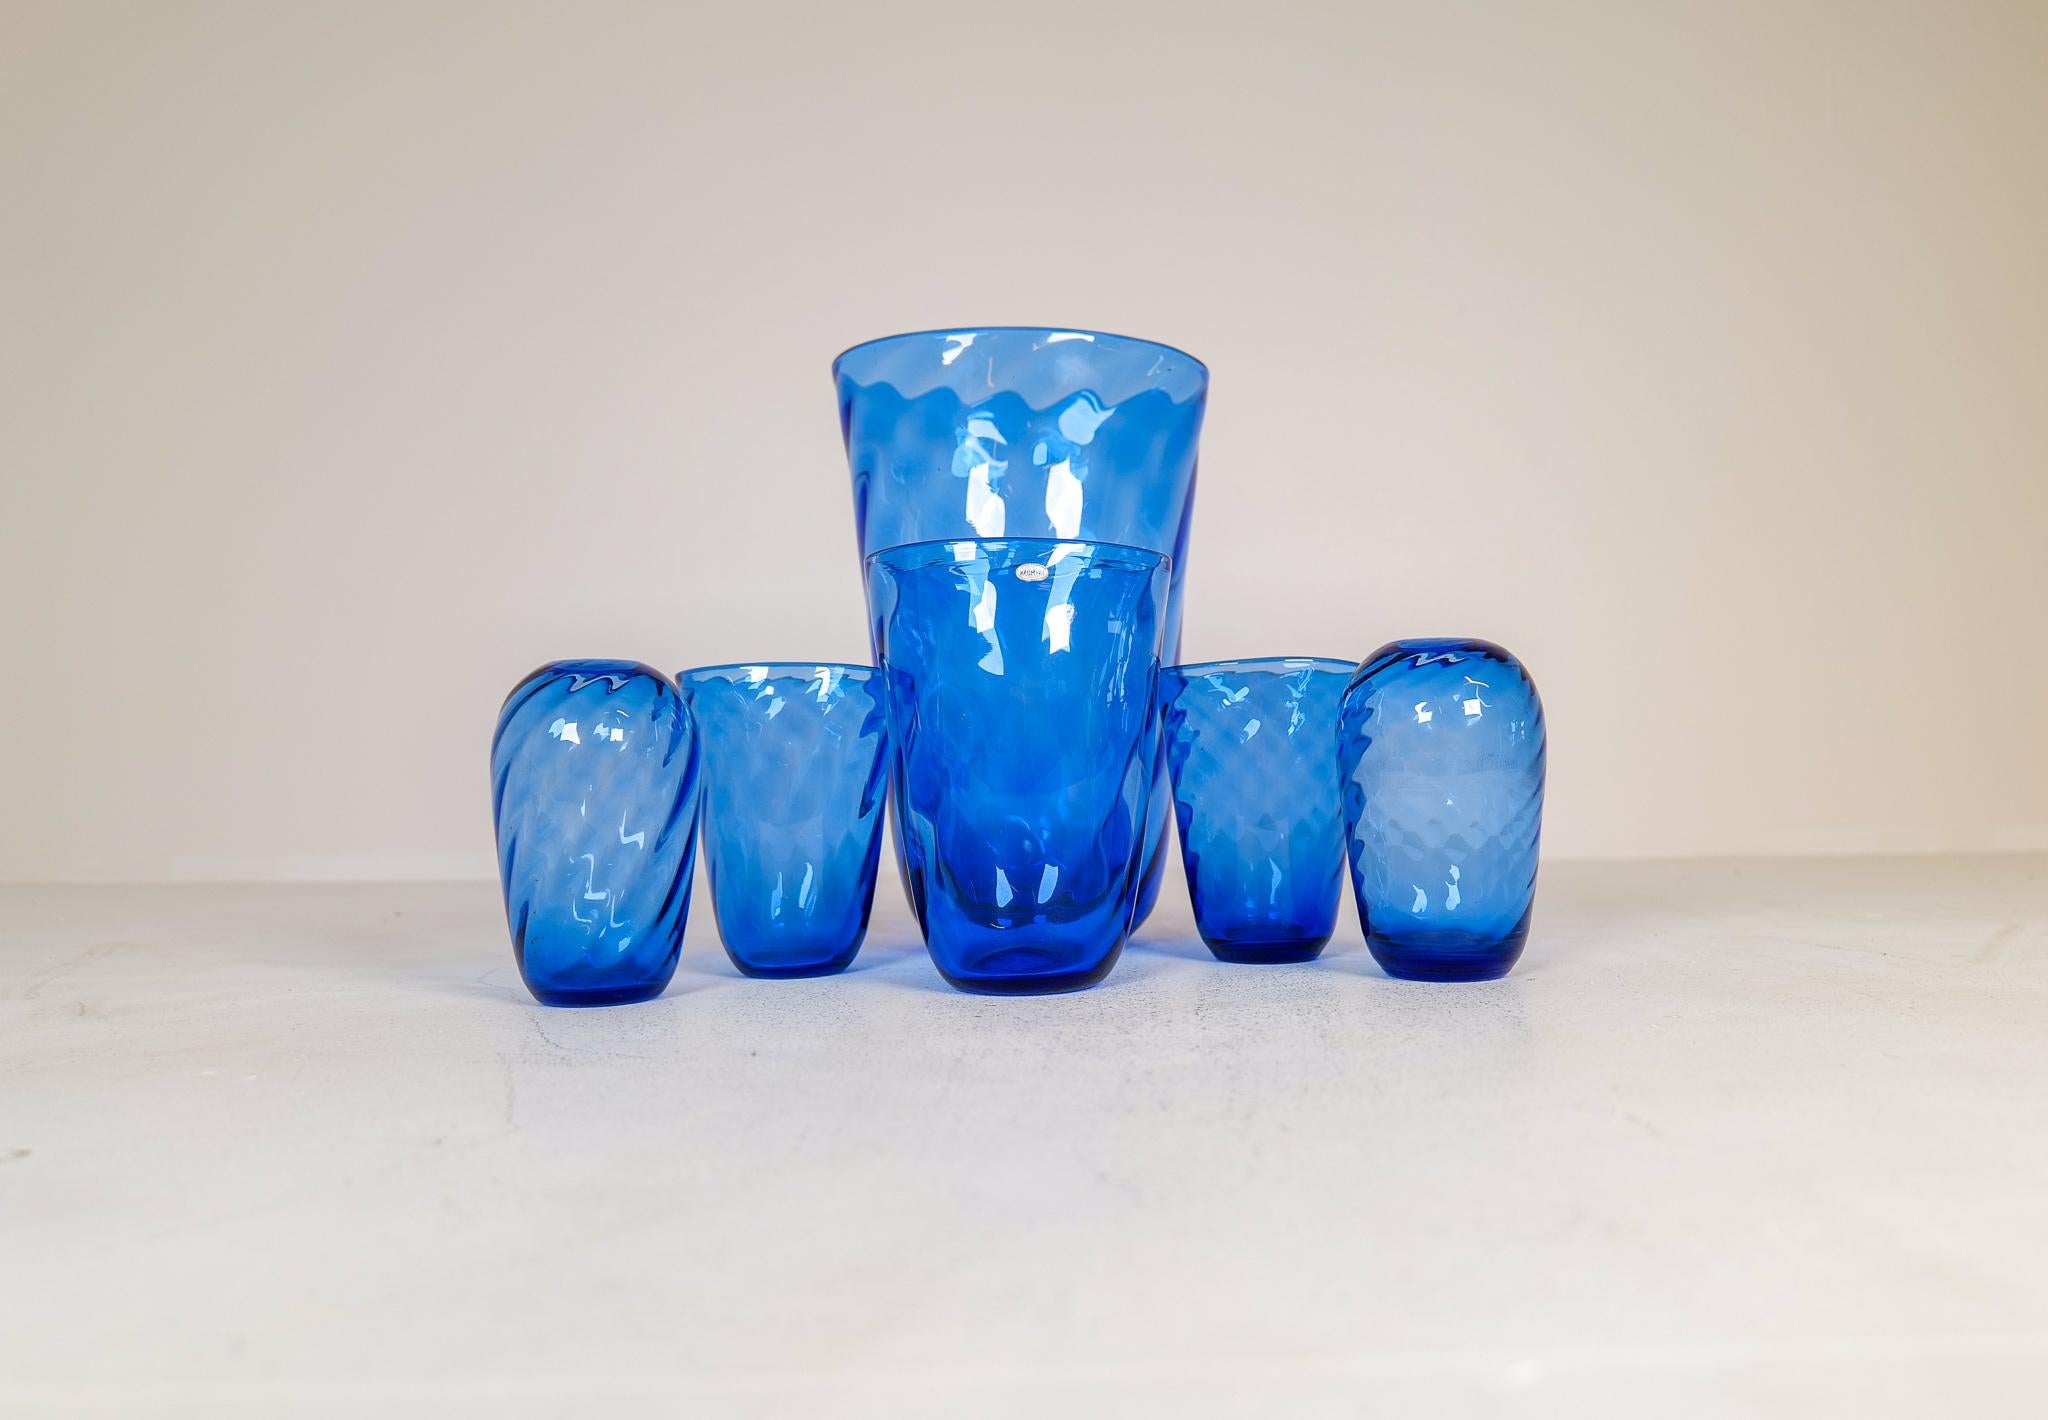 This wonderful turbine driven; blue glass vases was made in Sweden at Reijmyre. Designed by Monica Bratt. Wonderful blue color with that cool look of the glass twisting. All made by hand during the 1937-1942. Added to this collection is the very